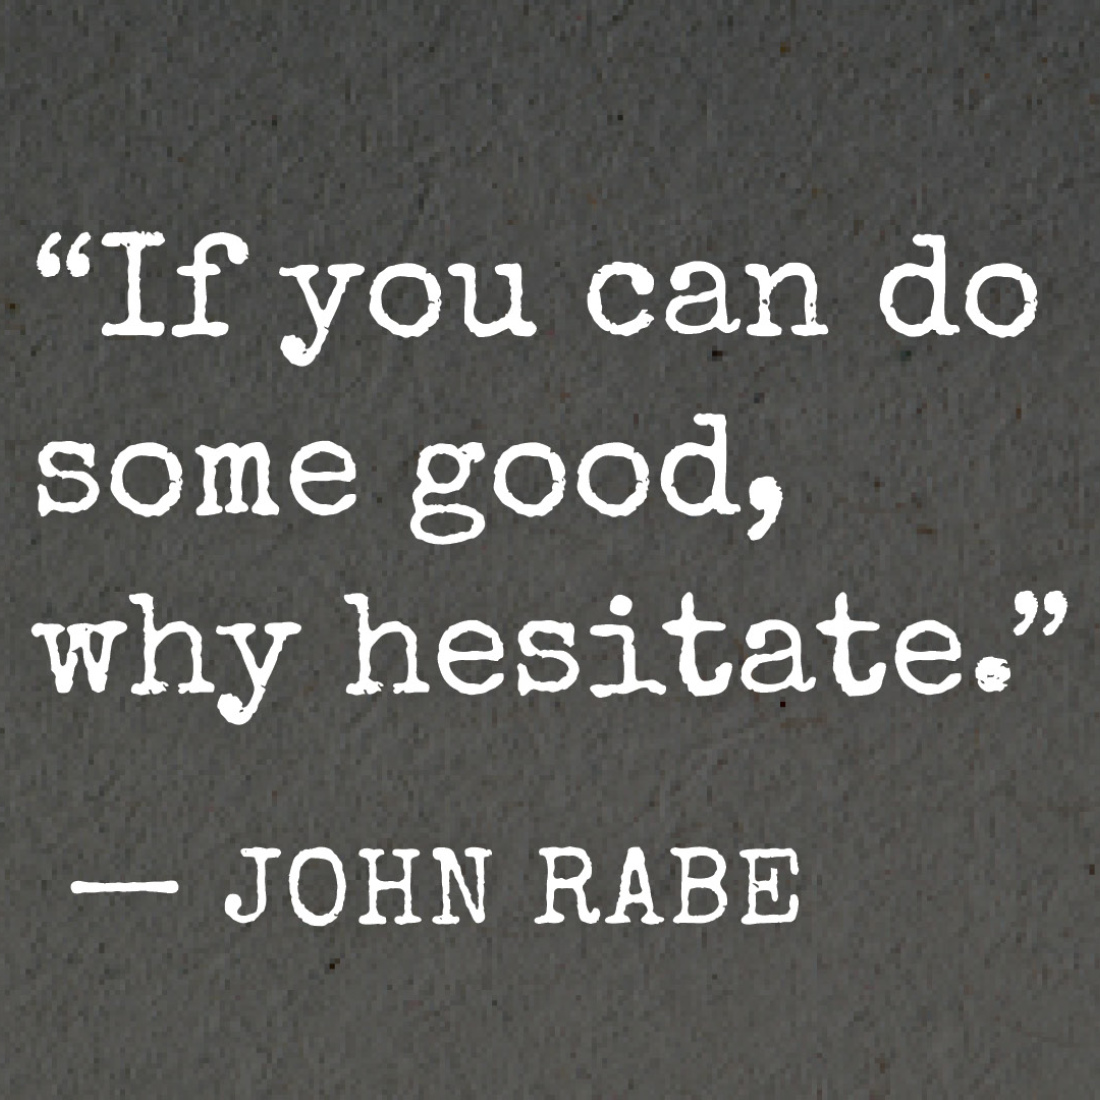 "If you can do some good, why hesitate." quote from John Rabe